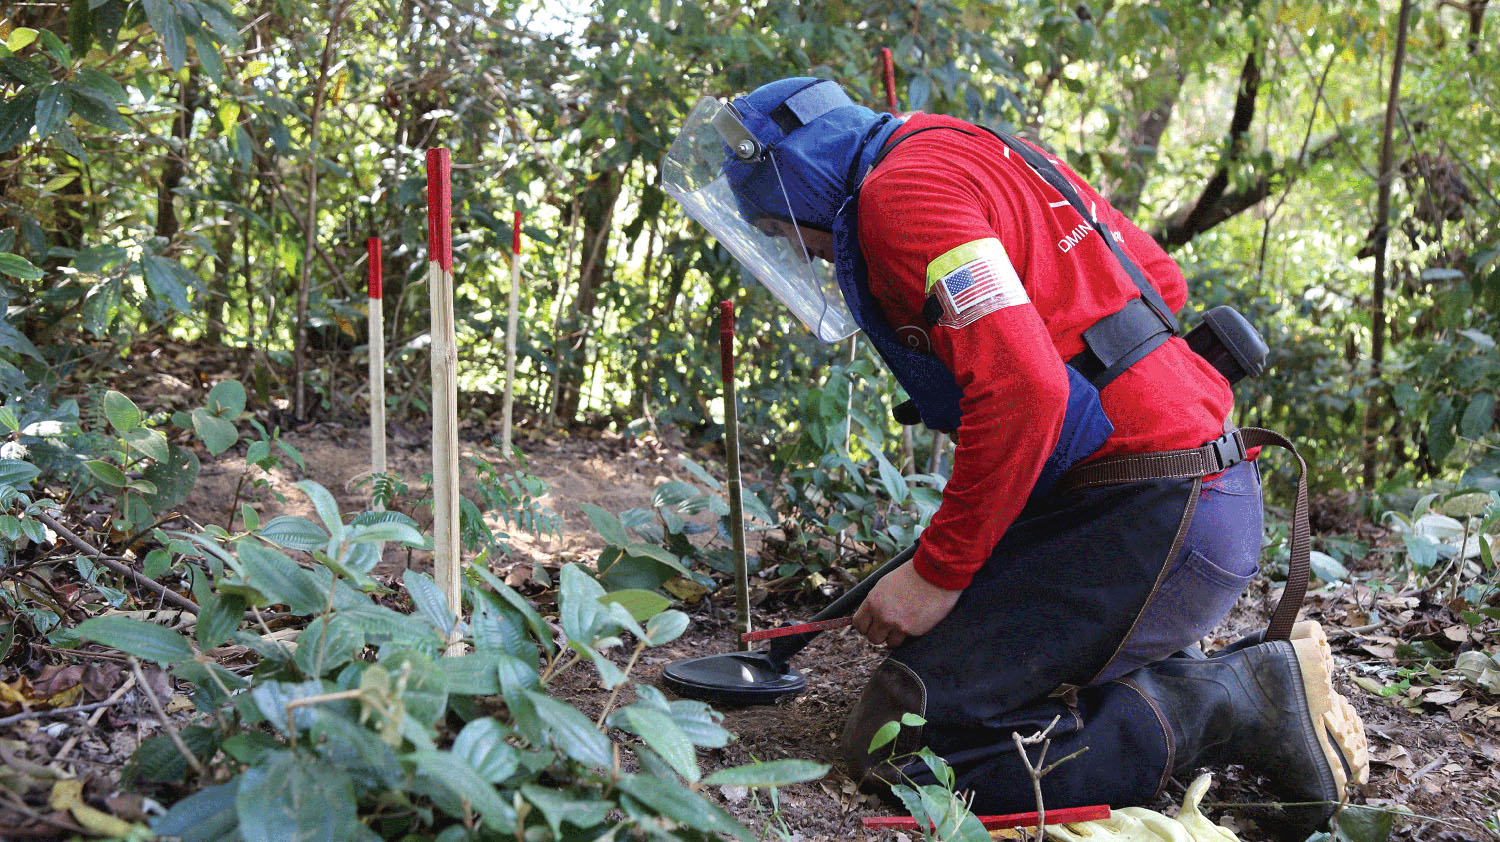 A person wearing a red shirt, faces hield and apron kneels on the ground in a forested area with a metal detector in one hand, and a wooden stake with a red tip in the other hand.